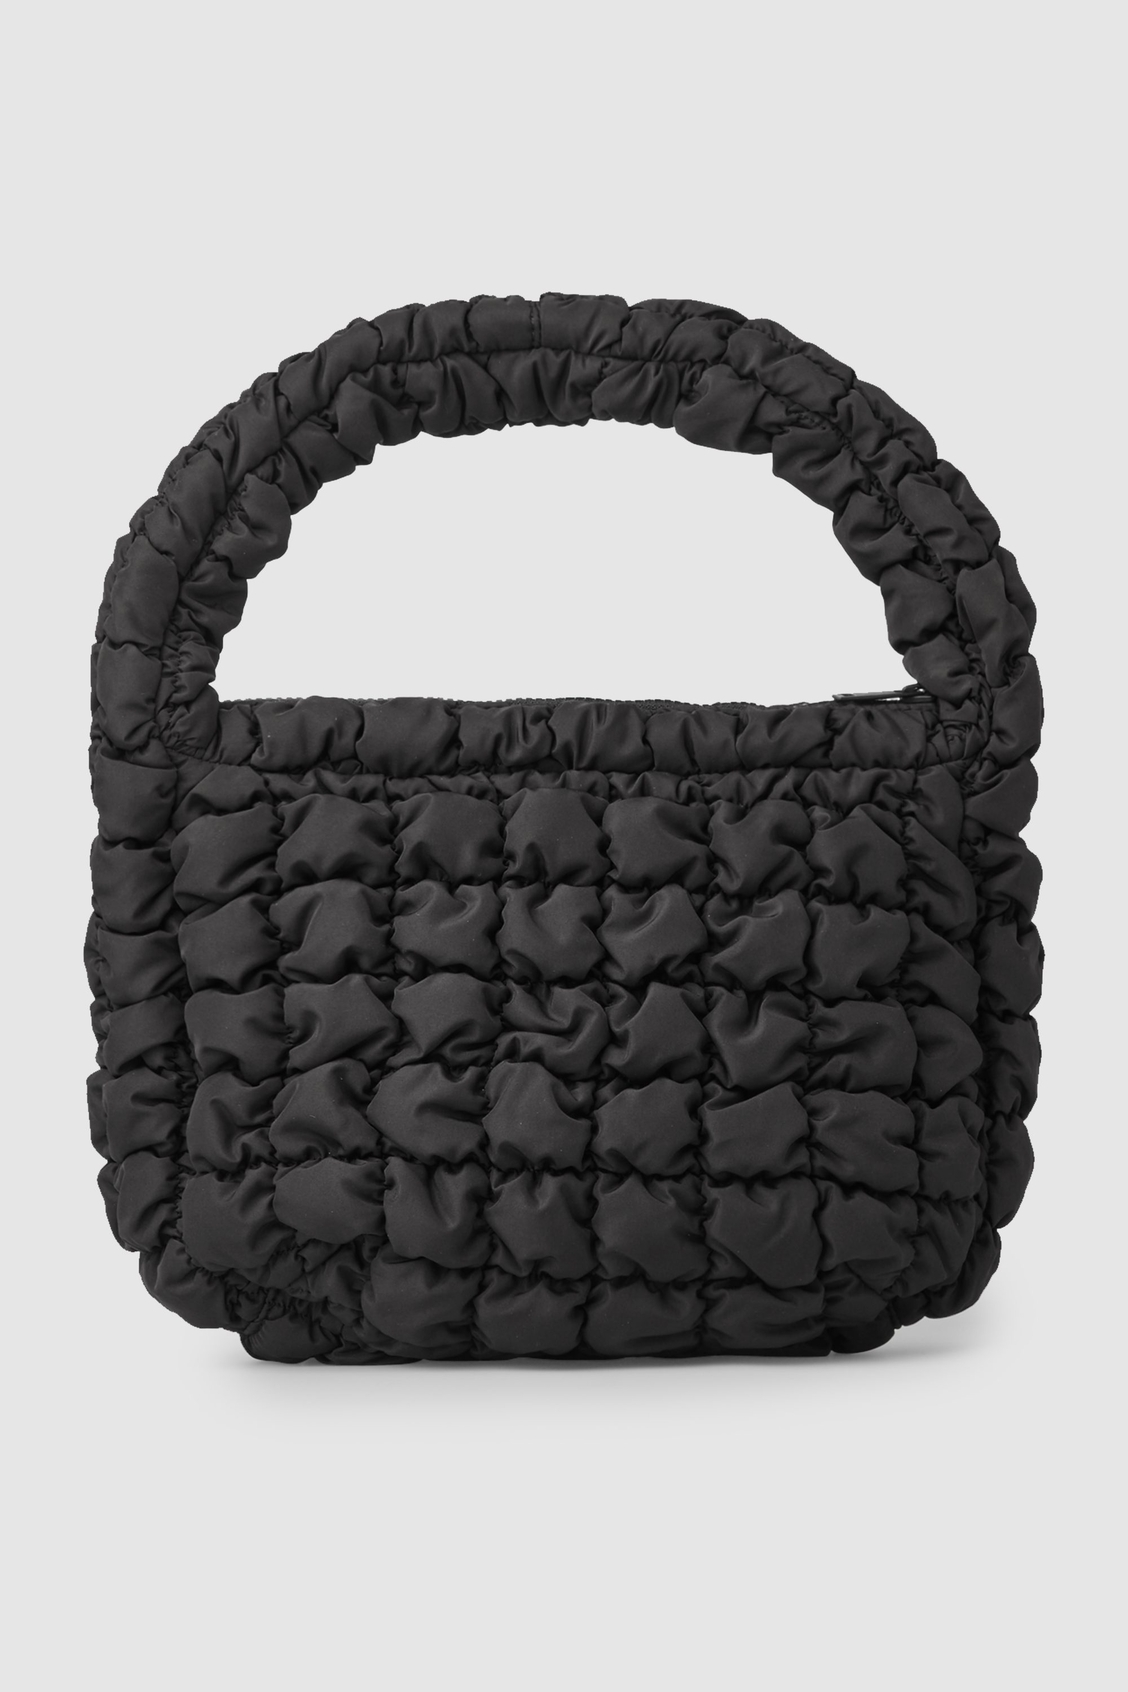 Cos Quilted Bag - Shop on Pinterest